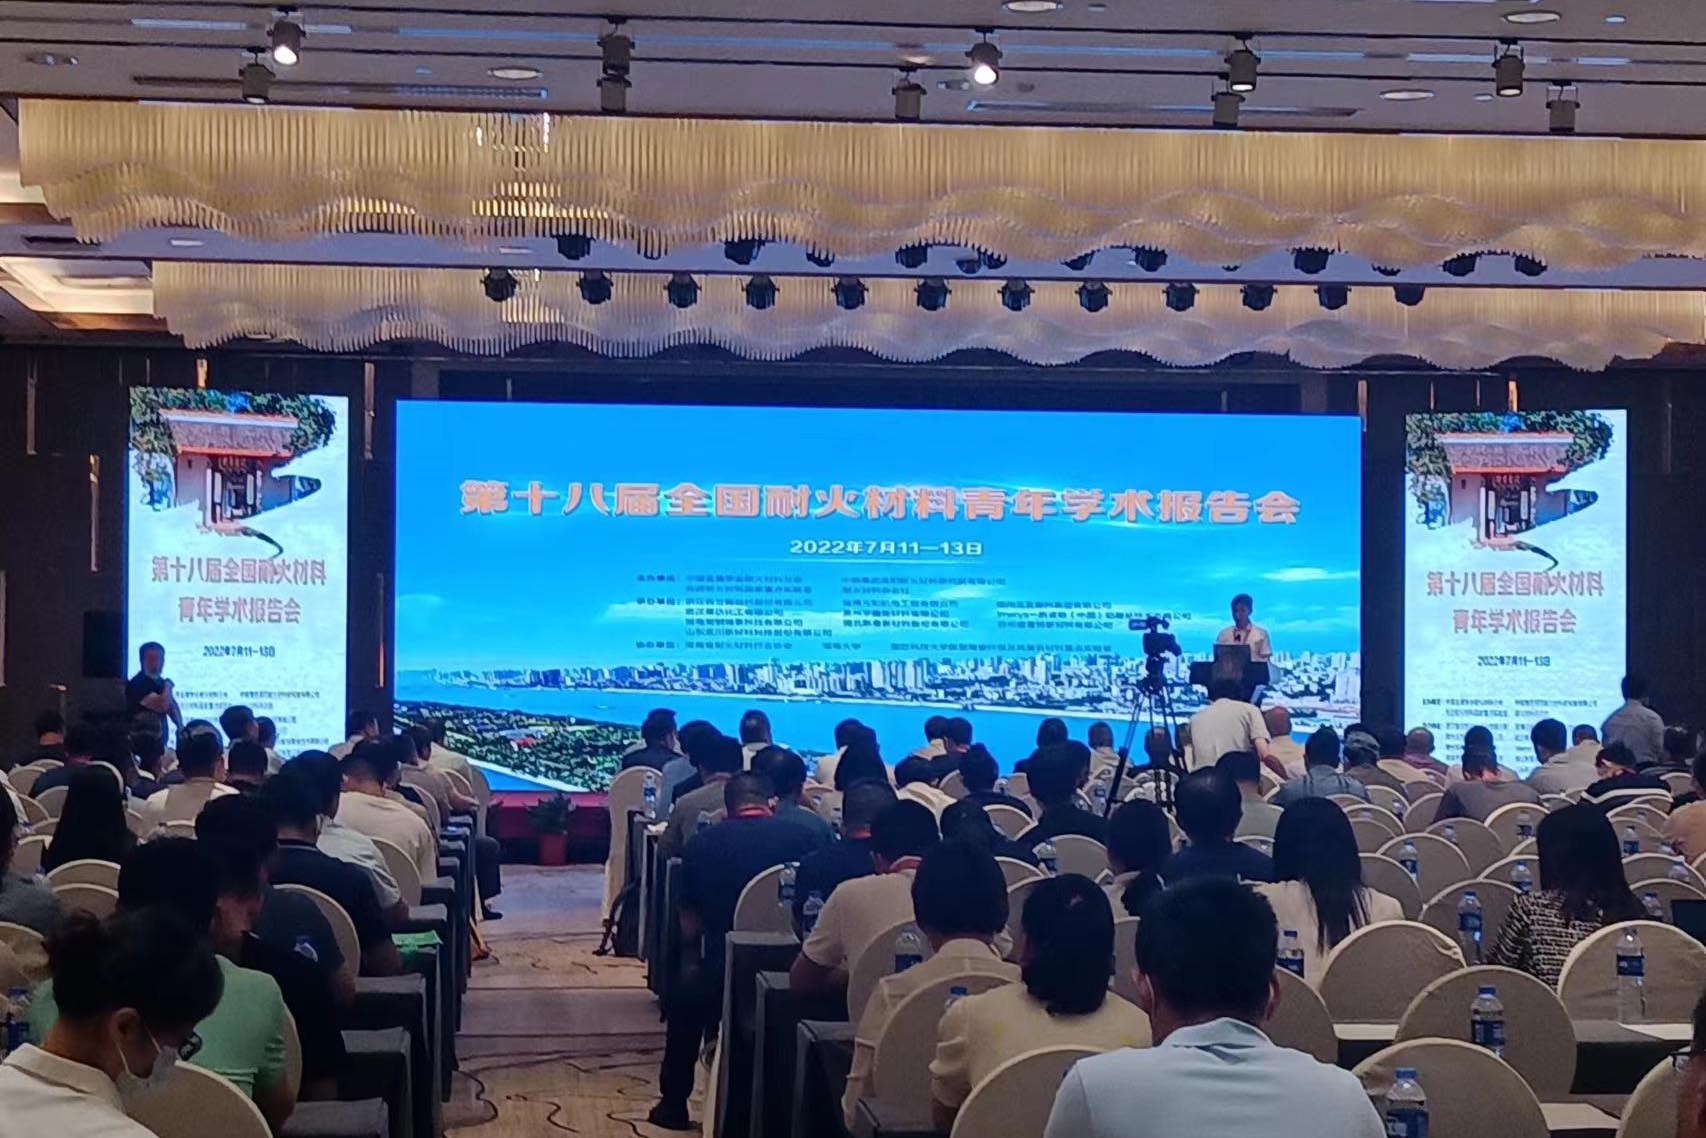 The 18th China Refractory Youth Academic Research Symposium